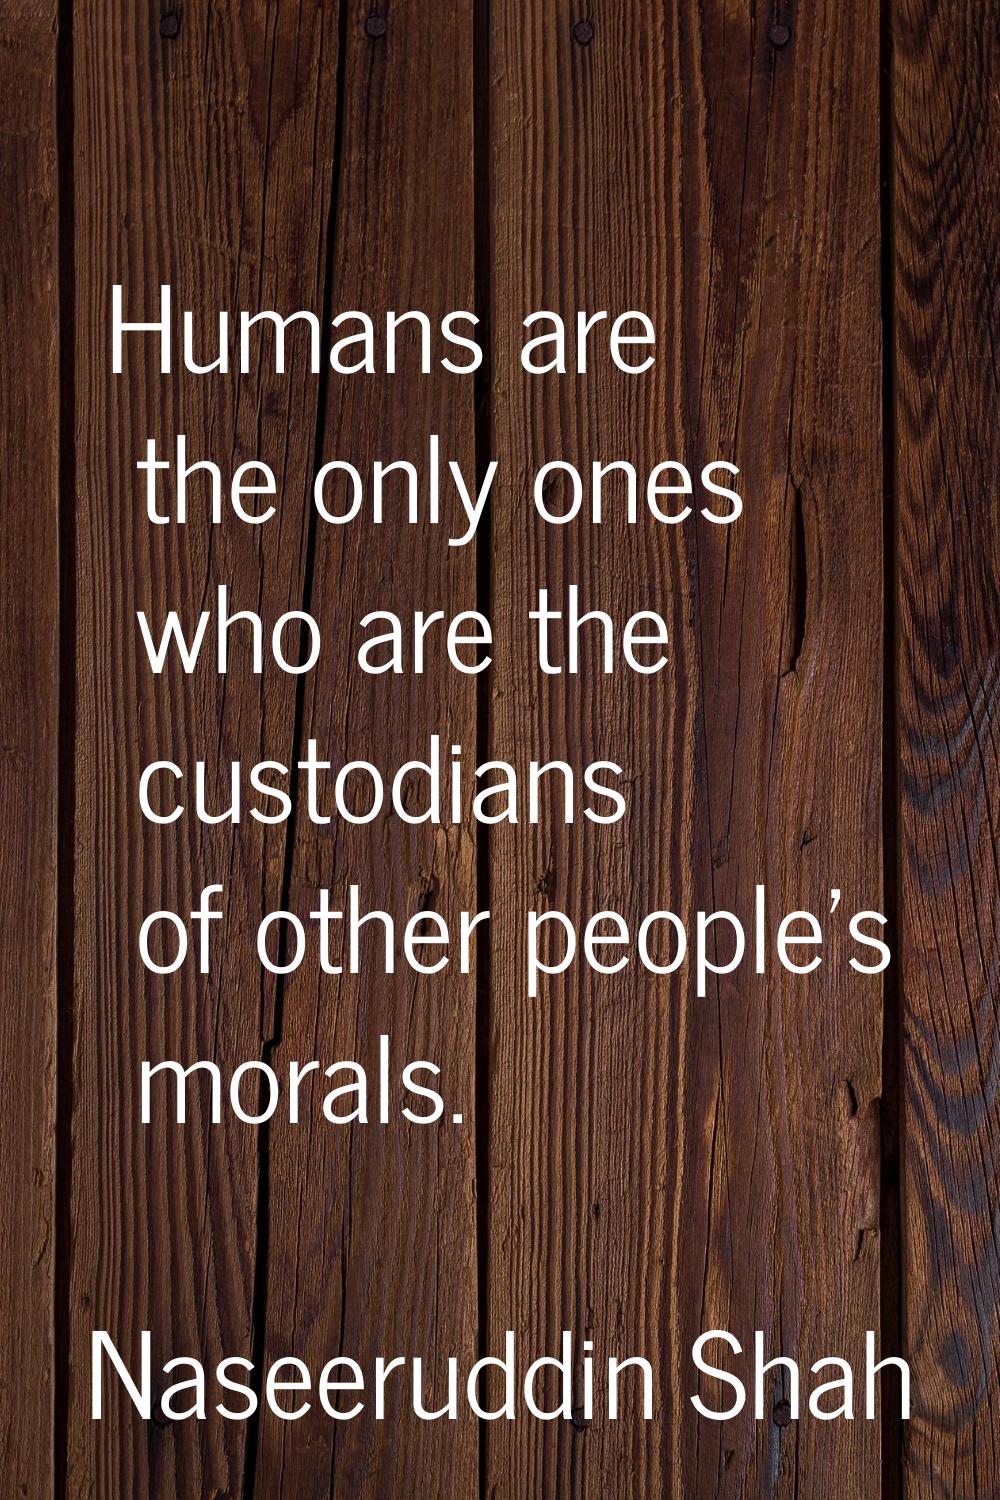 Humans are the only ones who are the custodians of other people's morals.